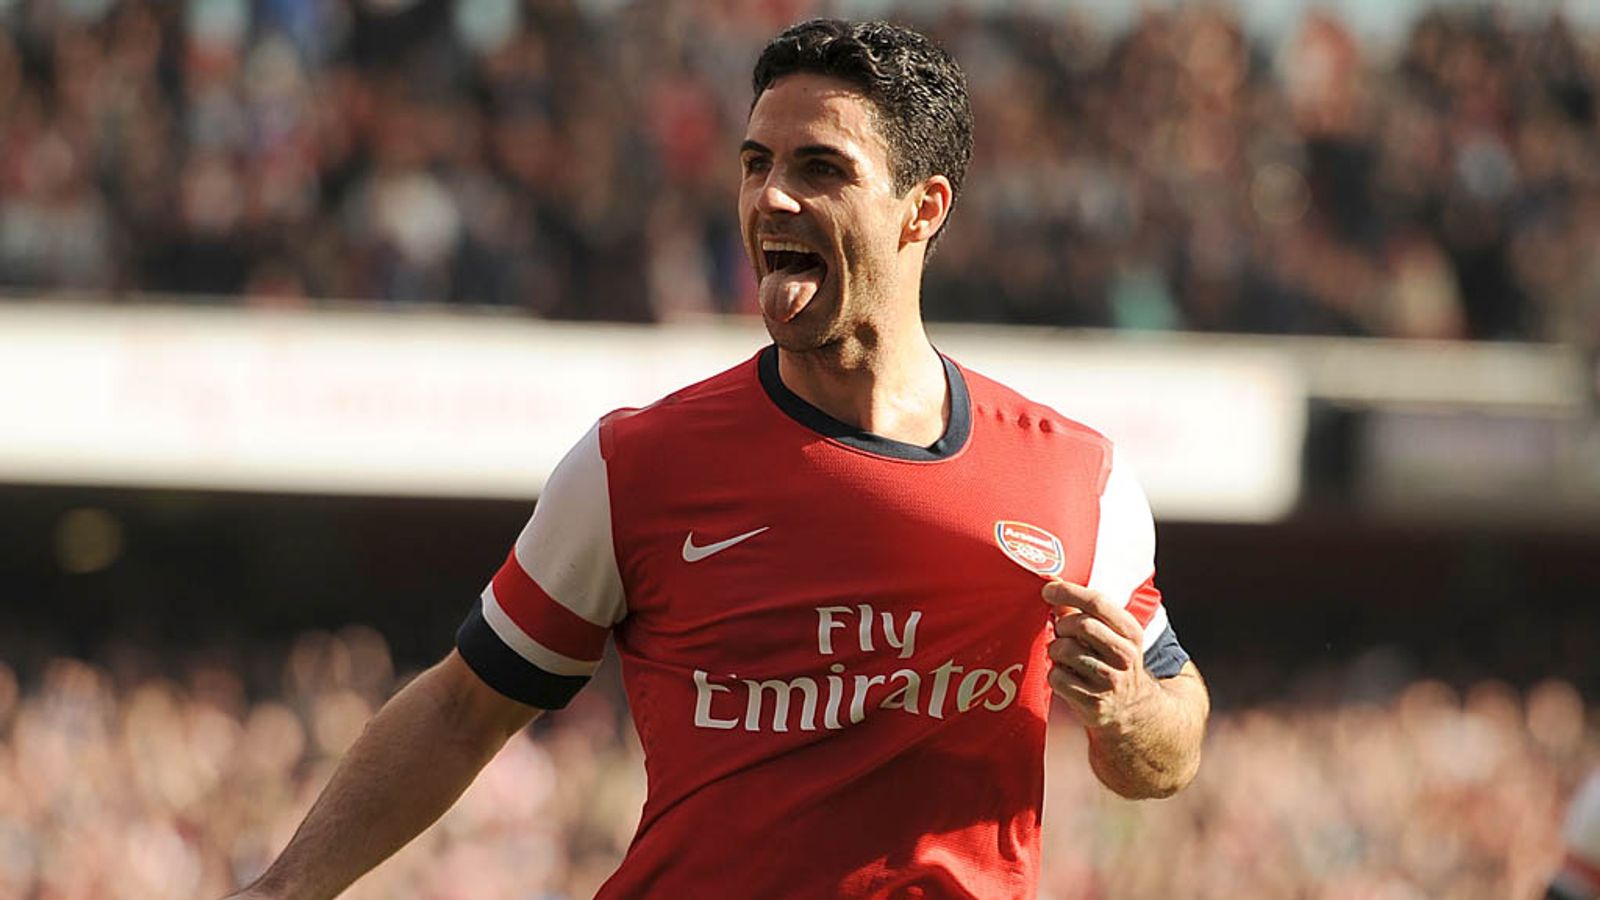 Transfer news: Mikel Arteta says he is happy with life at Arsenal